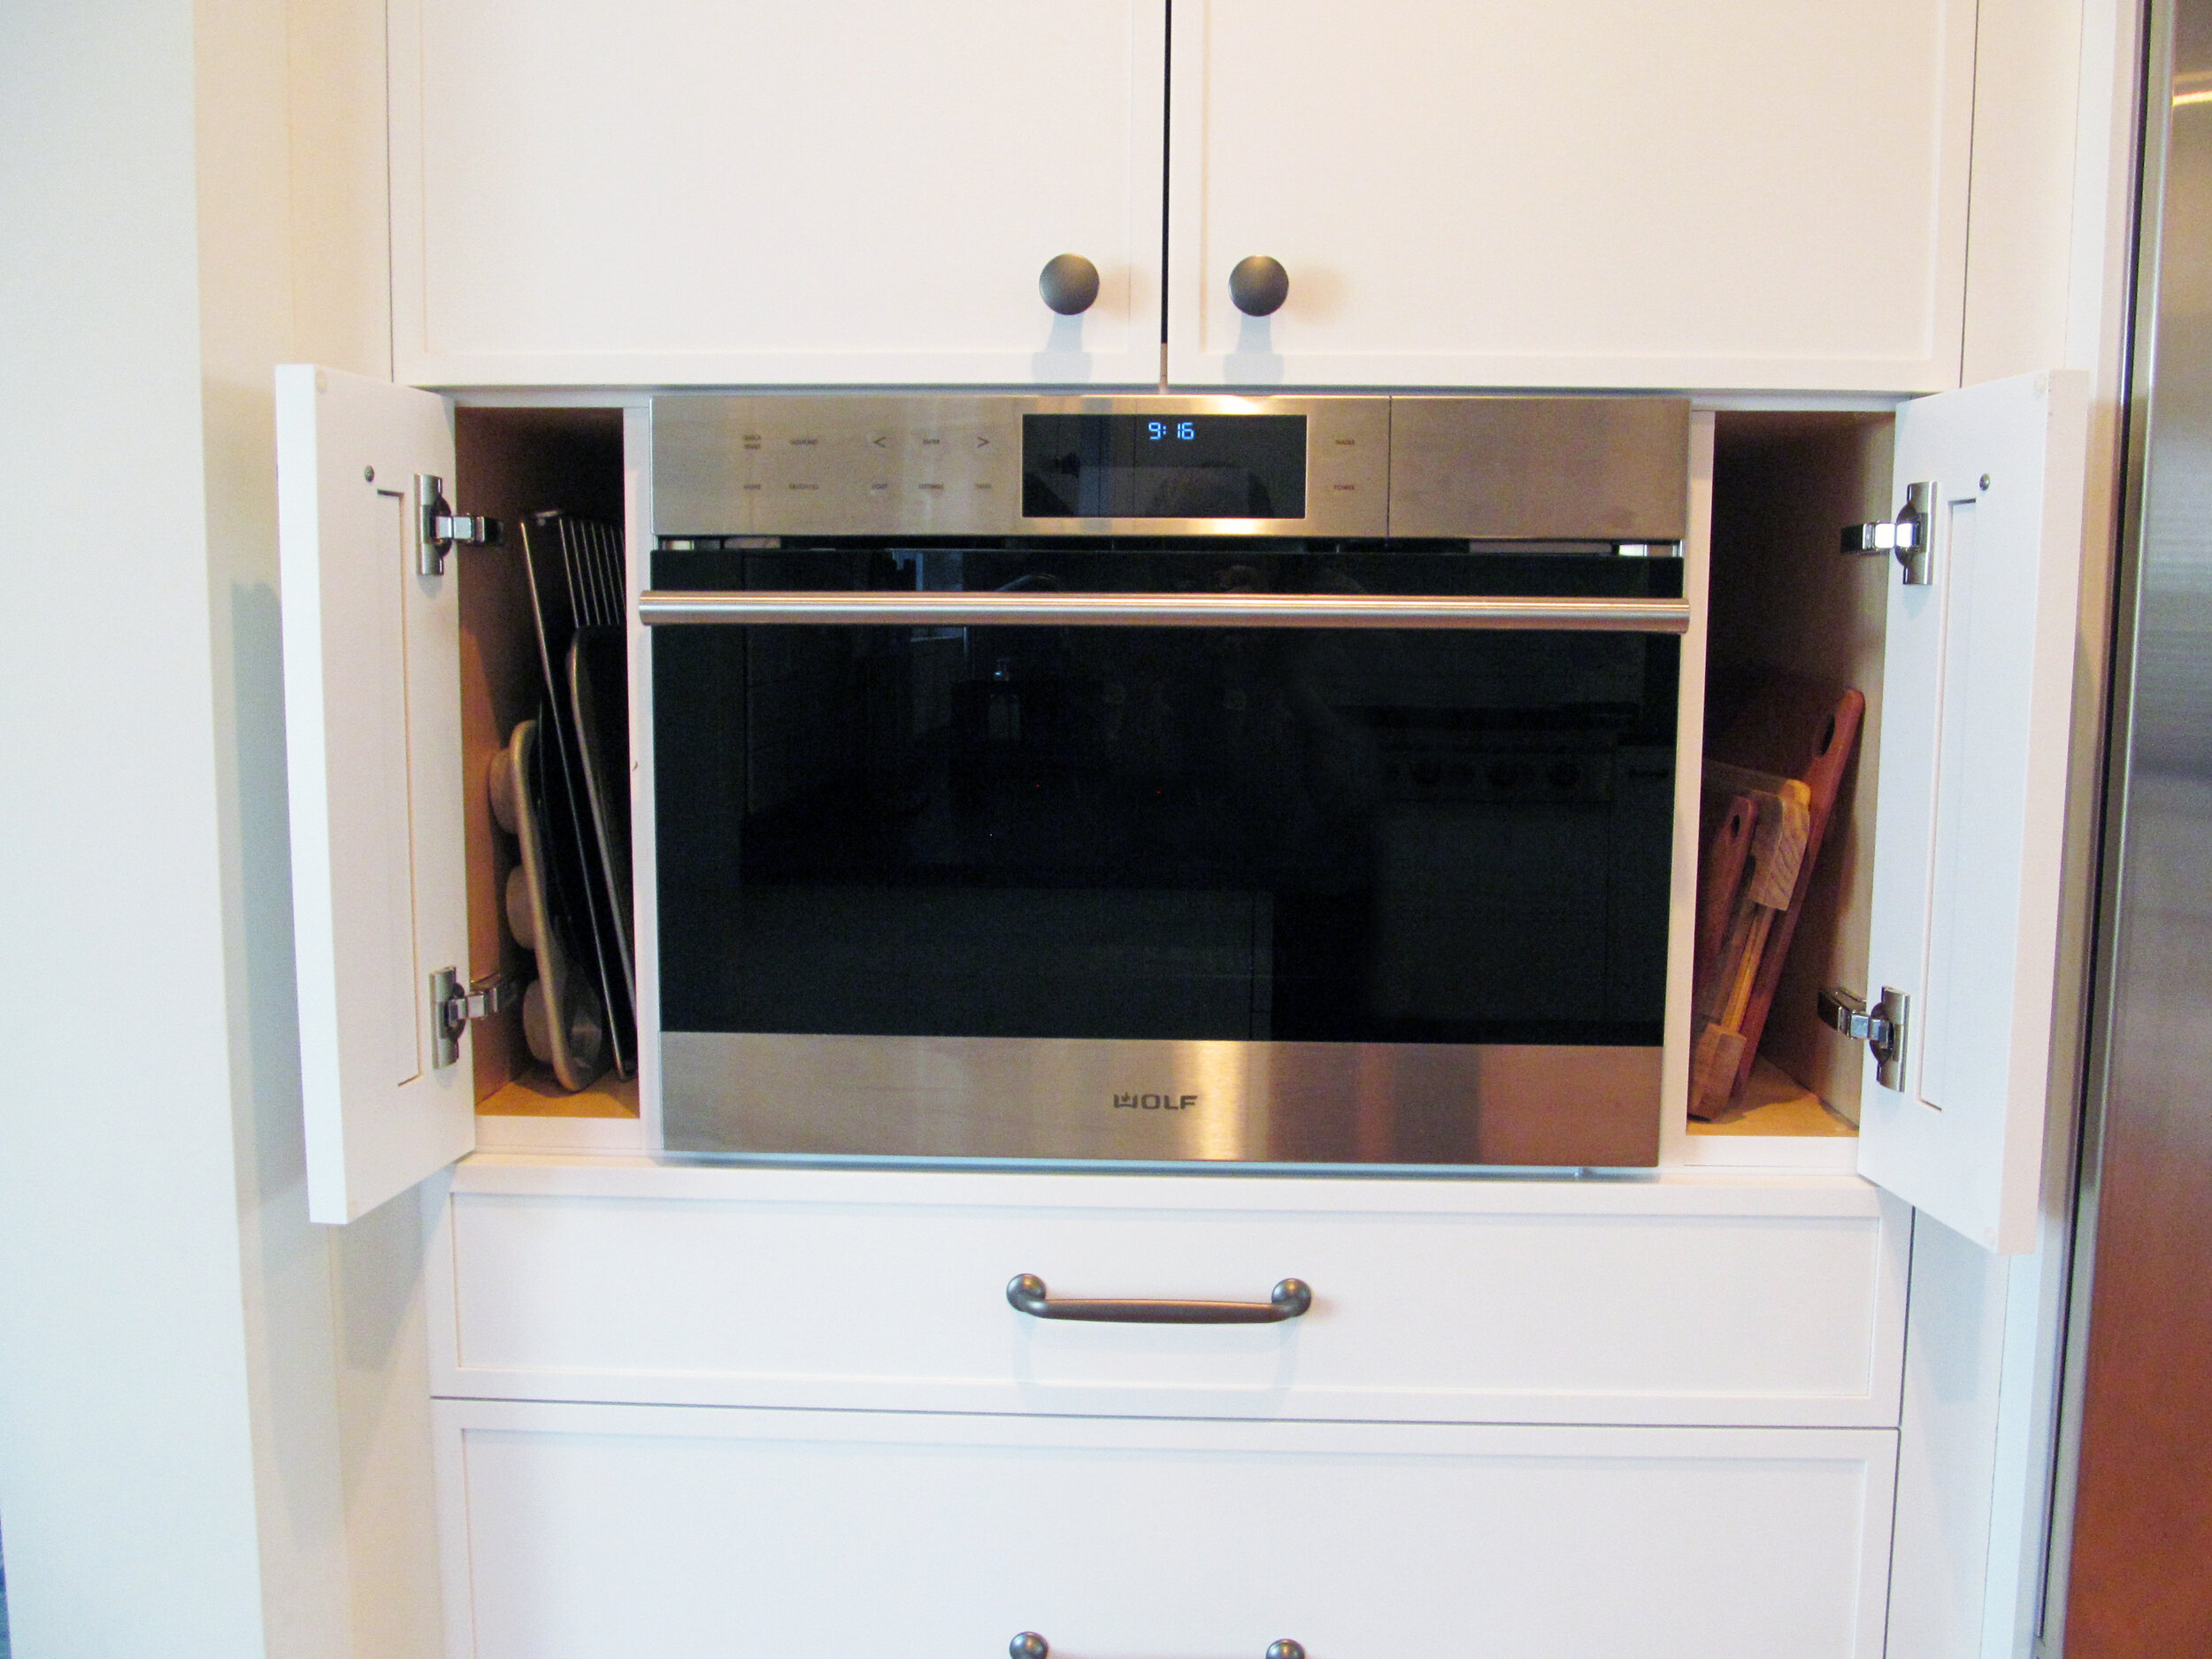 Vertical storage on both sides of the built-in microwave are handy for cutting boards and other flat objects.